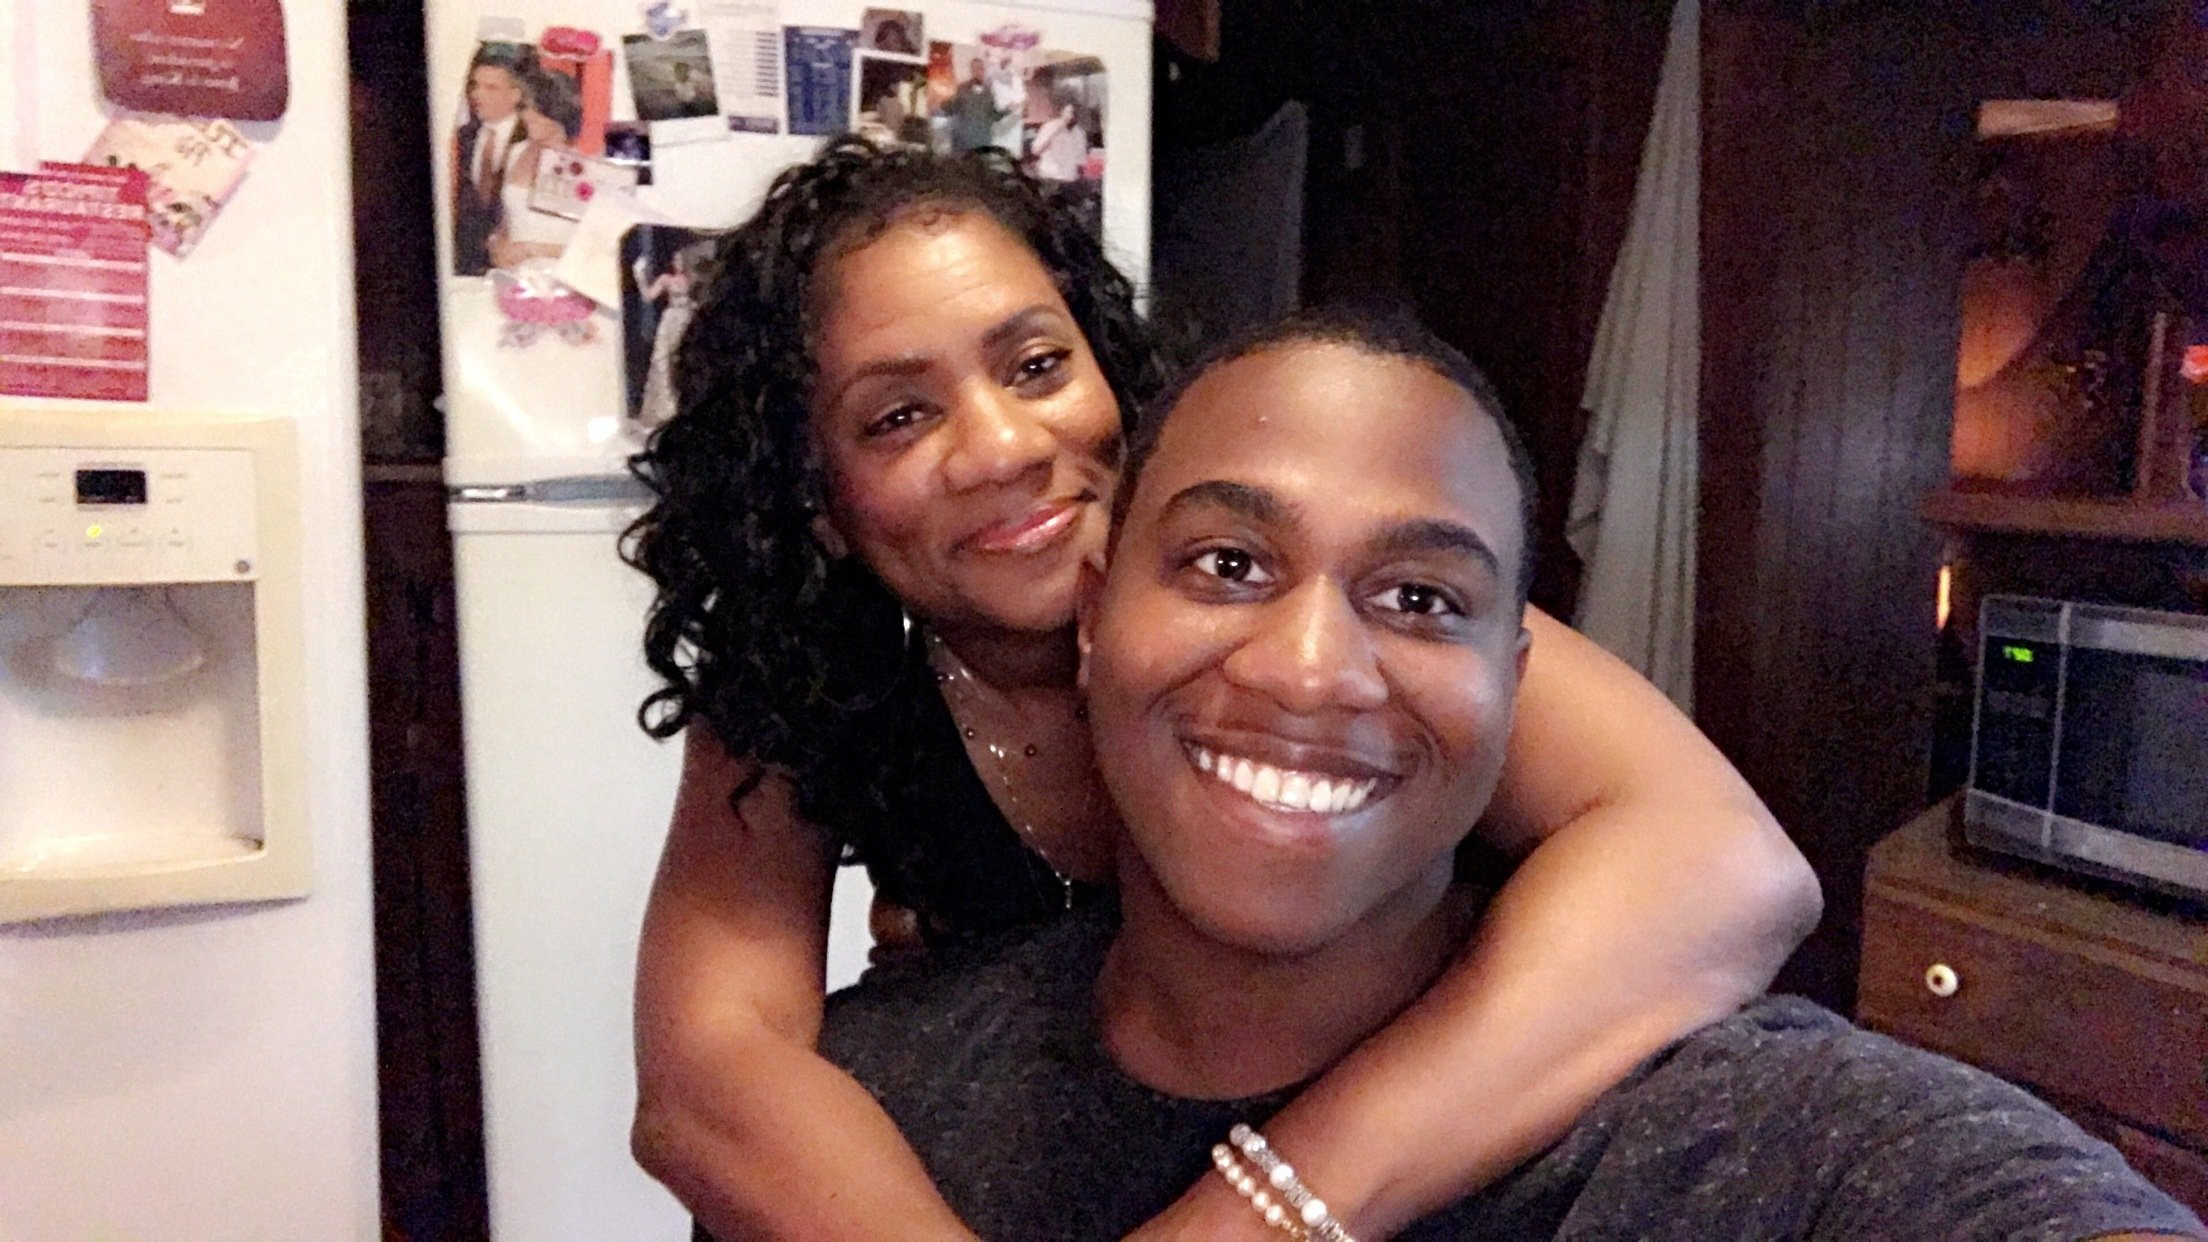 A smiling Black woman  hugging a smiling Black man in a kitchen area.